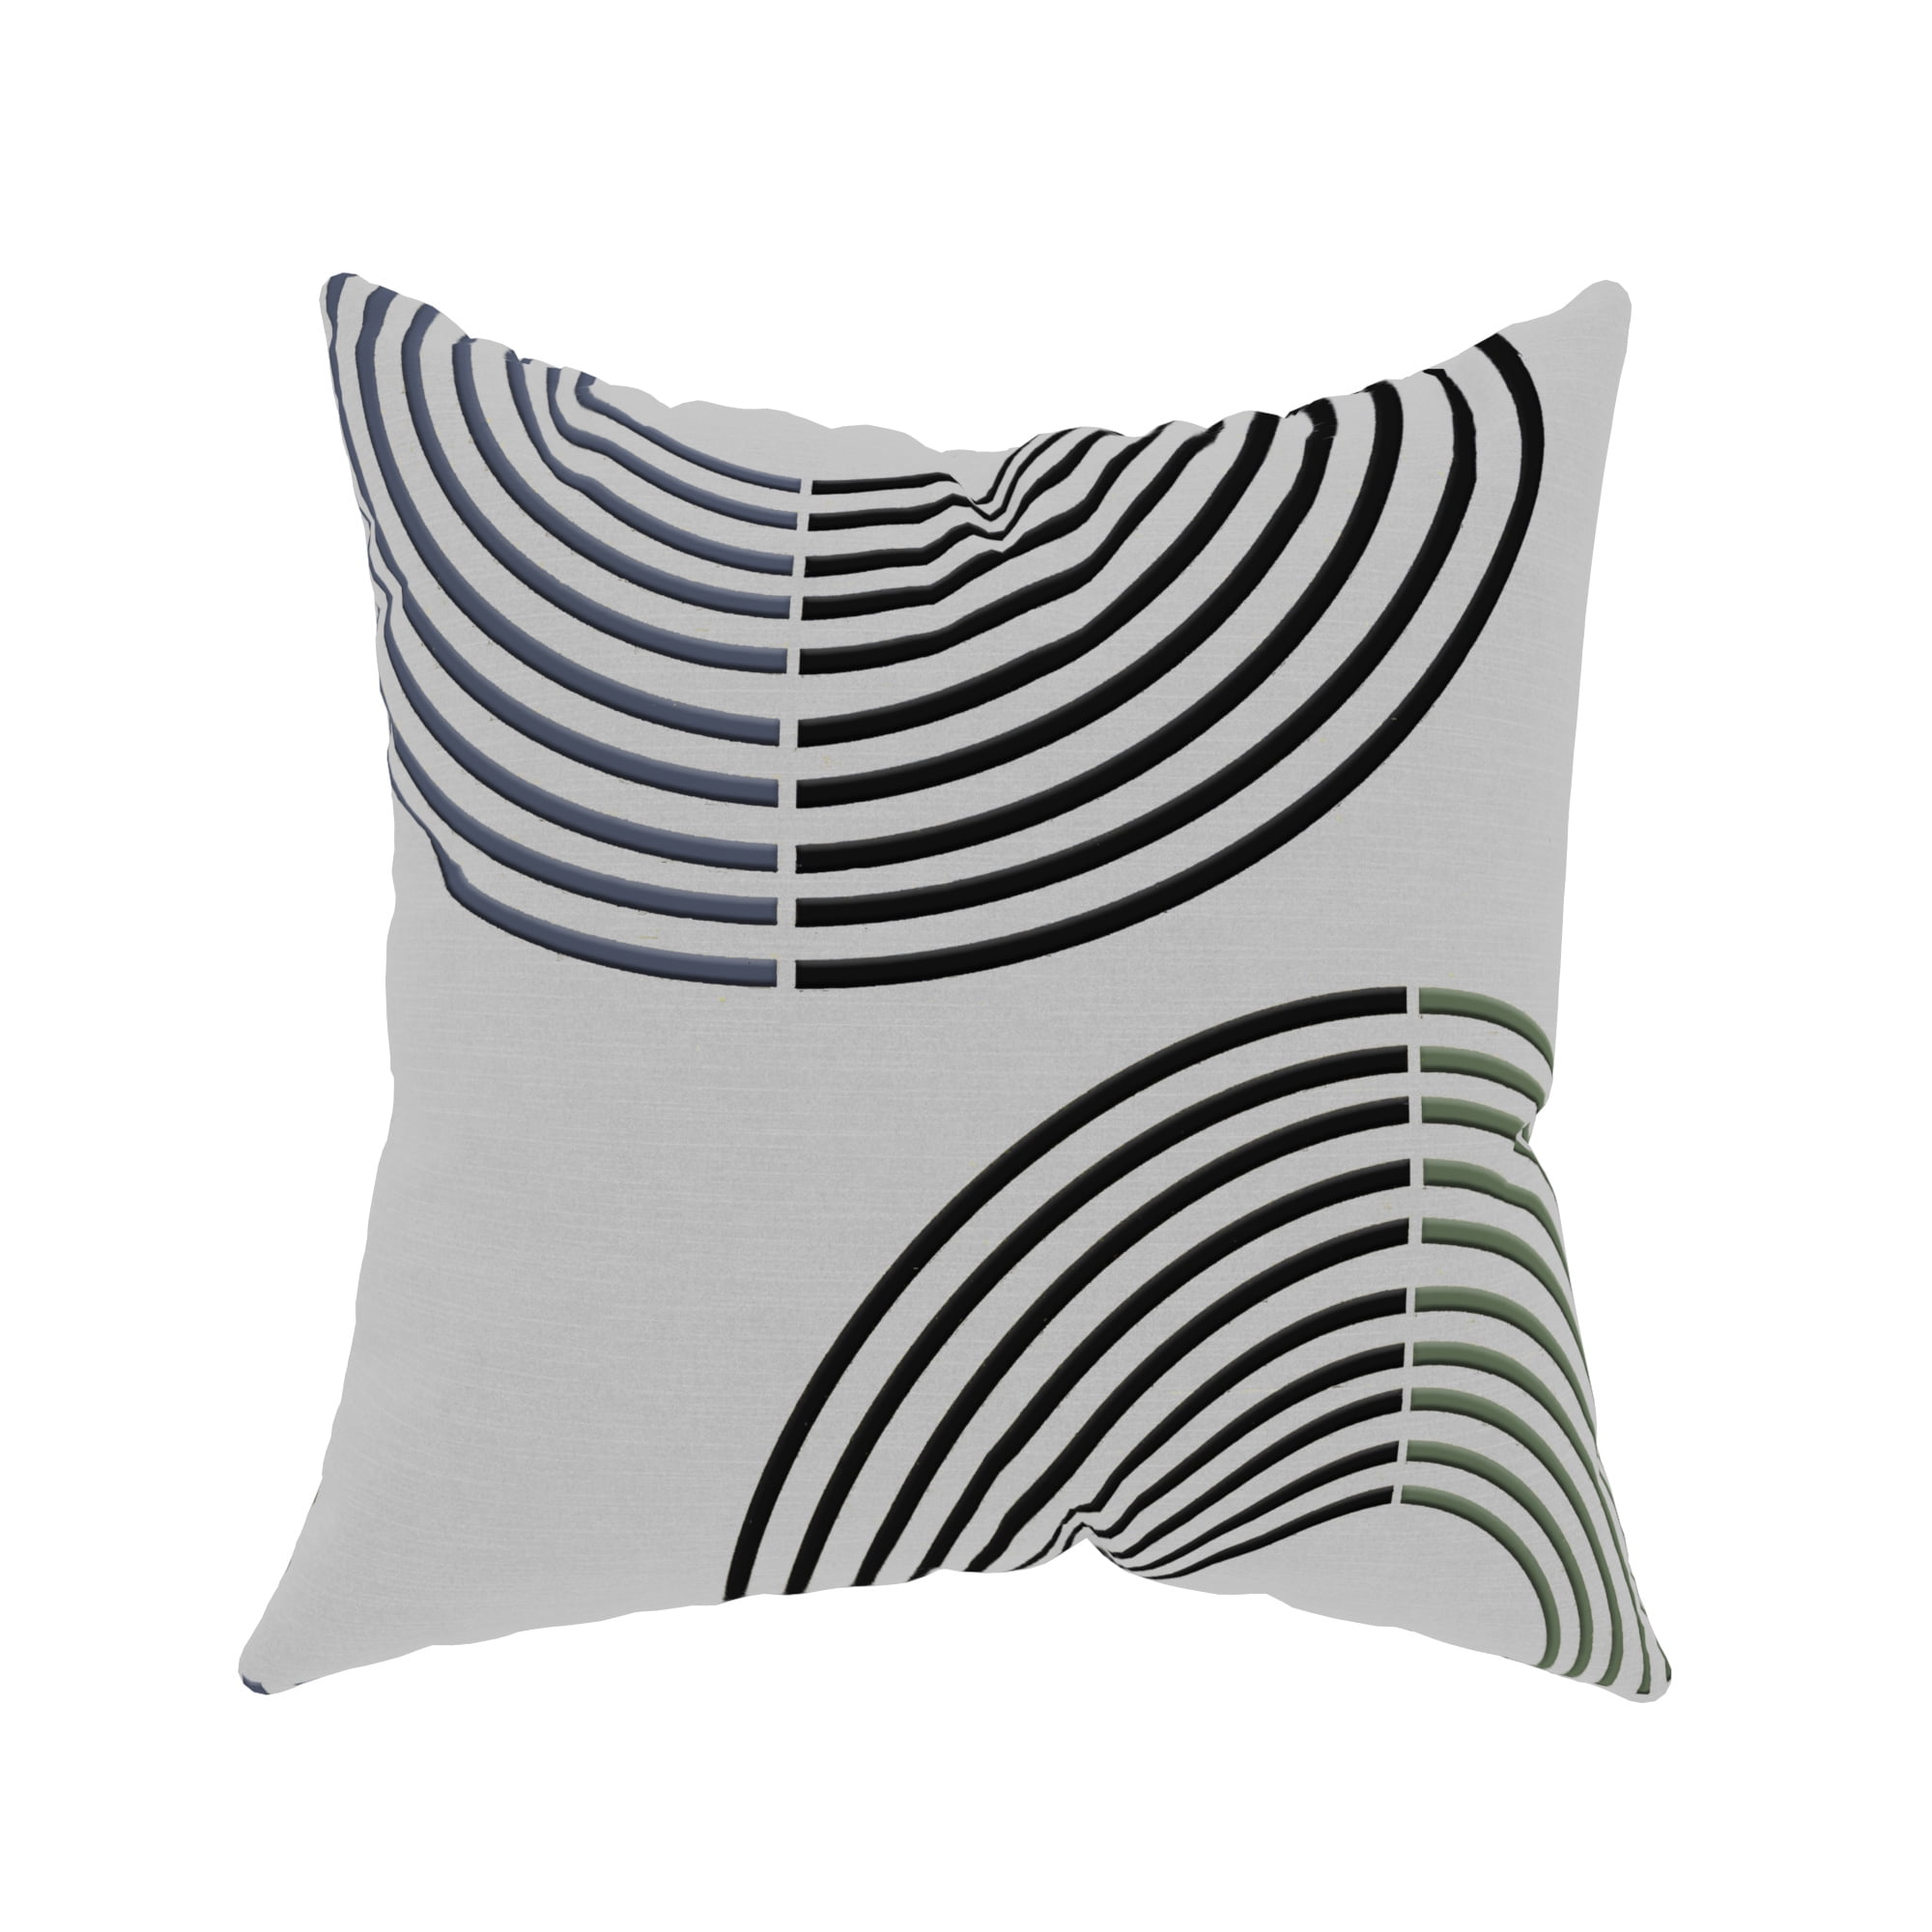 Geometry Painting Soft Cushion Cover Throw Pillow Case Sofa Decor For Home  Hot